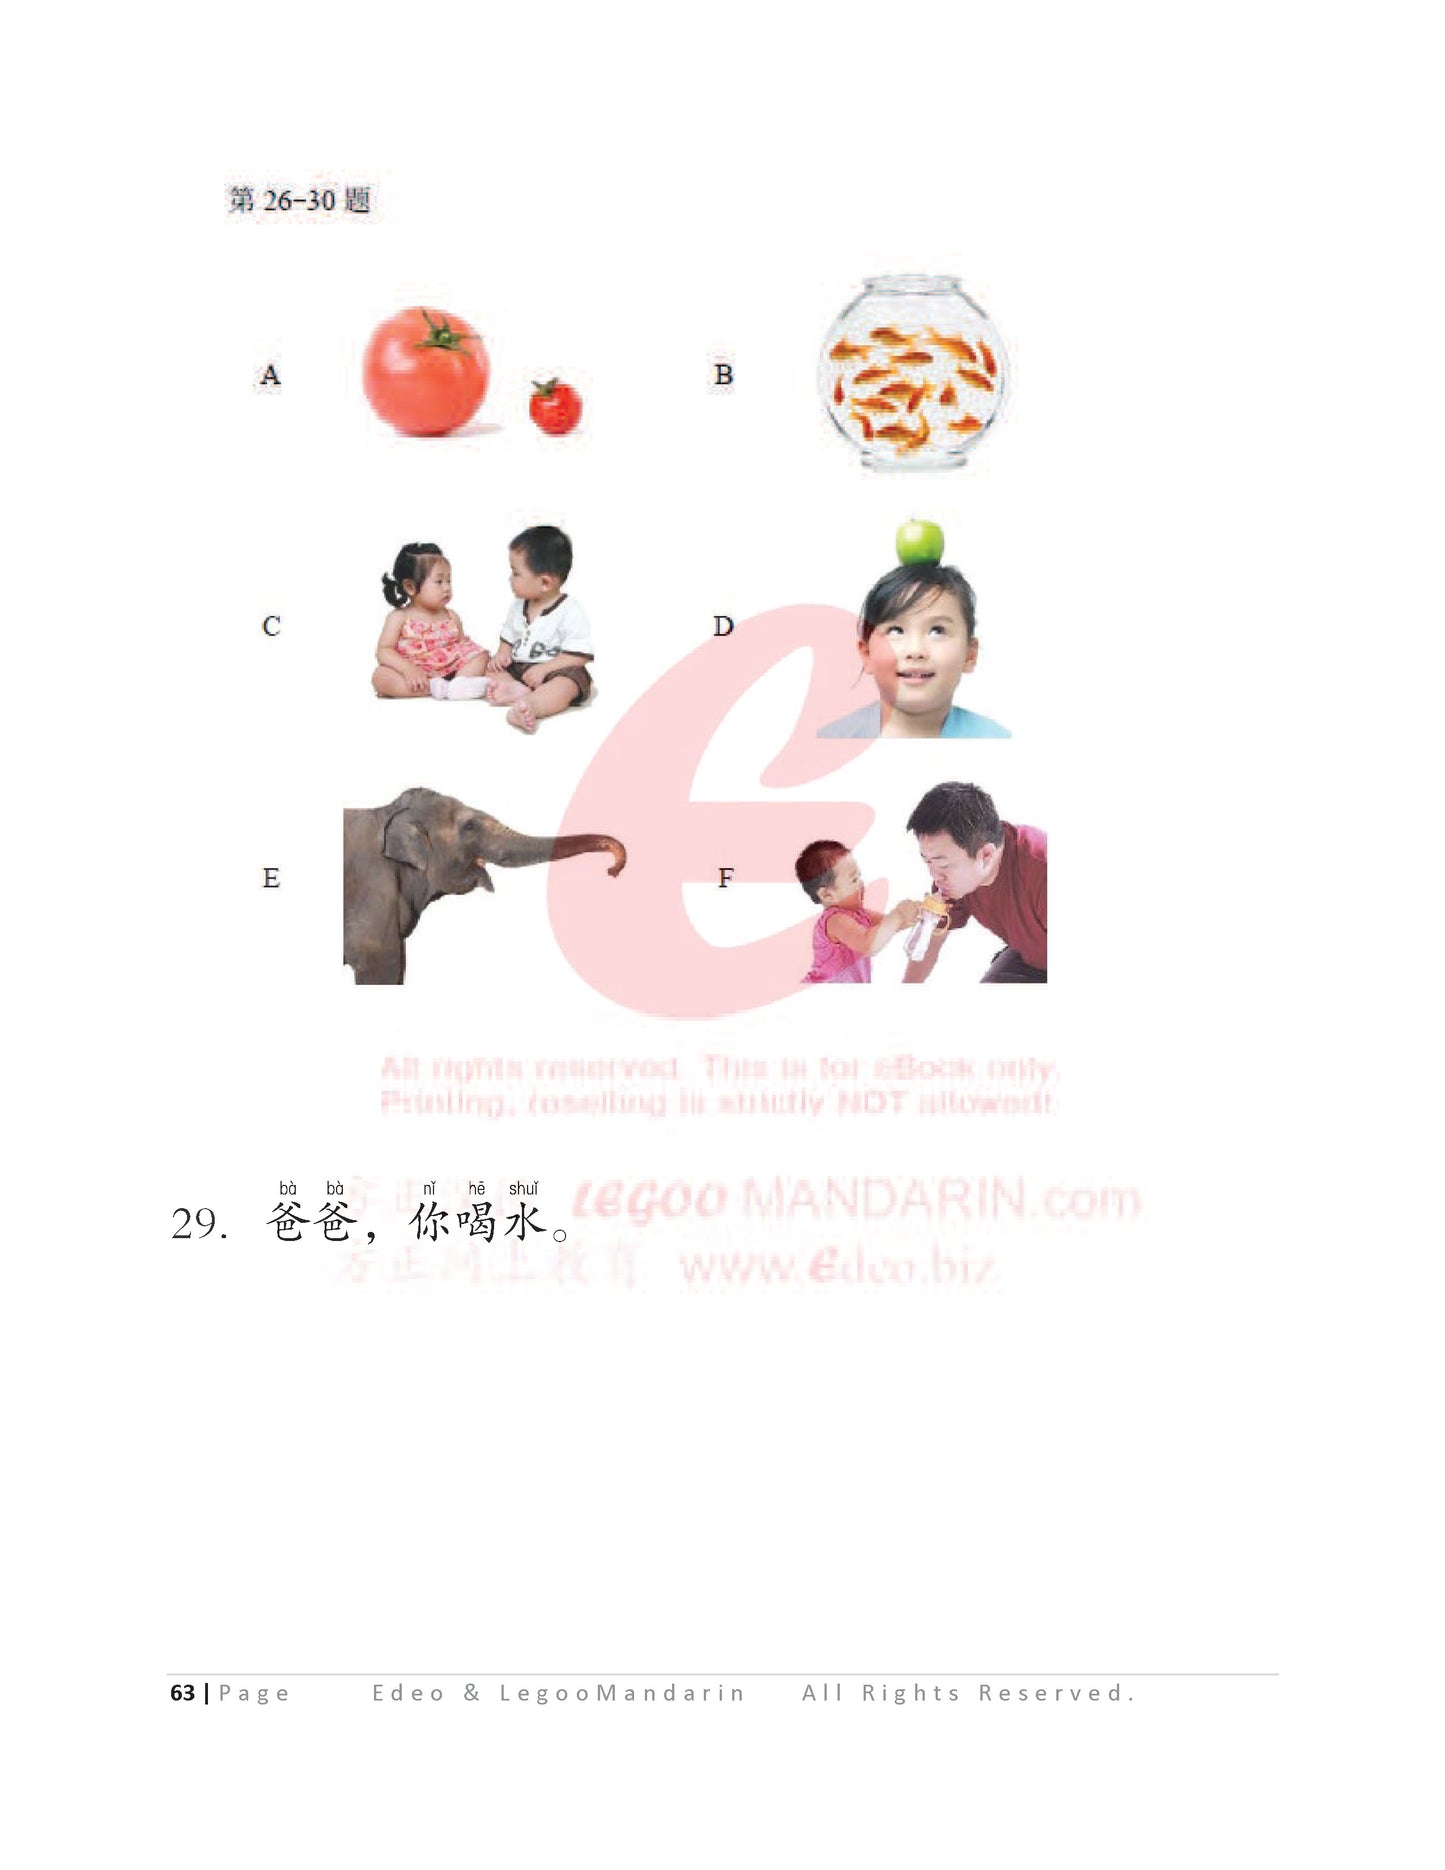 YCT 1 Chinese Intensive Reading for Kids Y10900 Official Mock 少儿汉语考试模拟考题